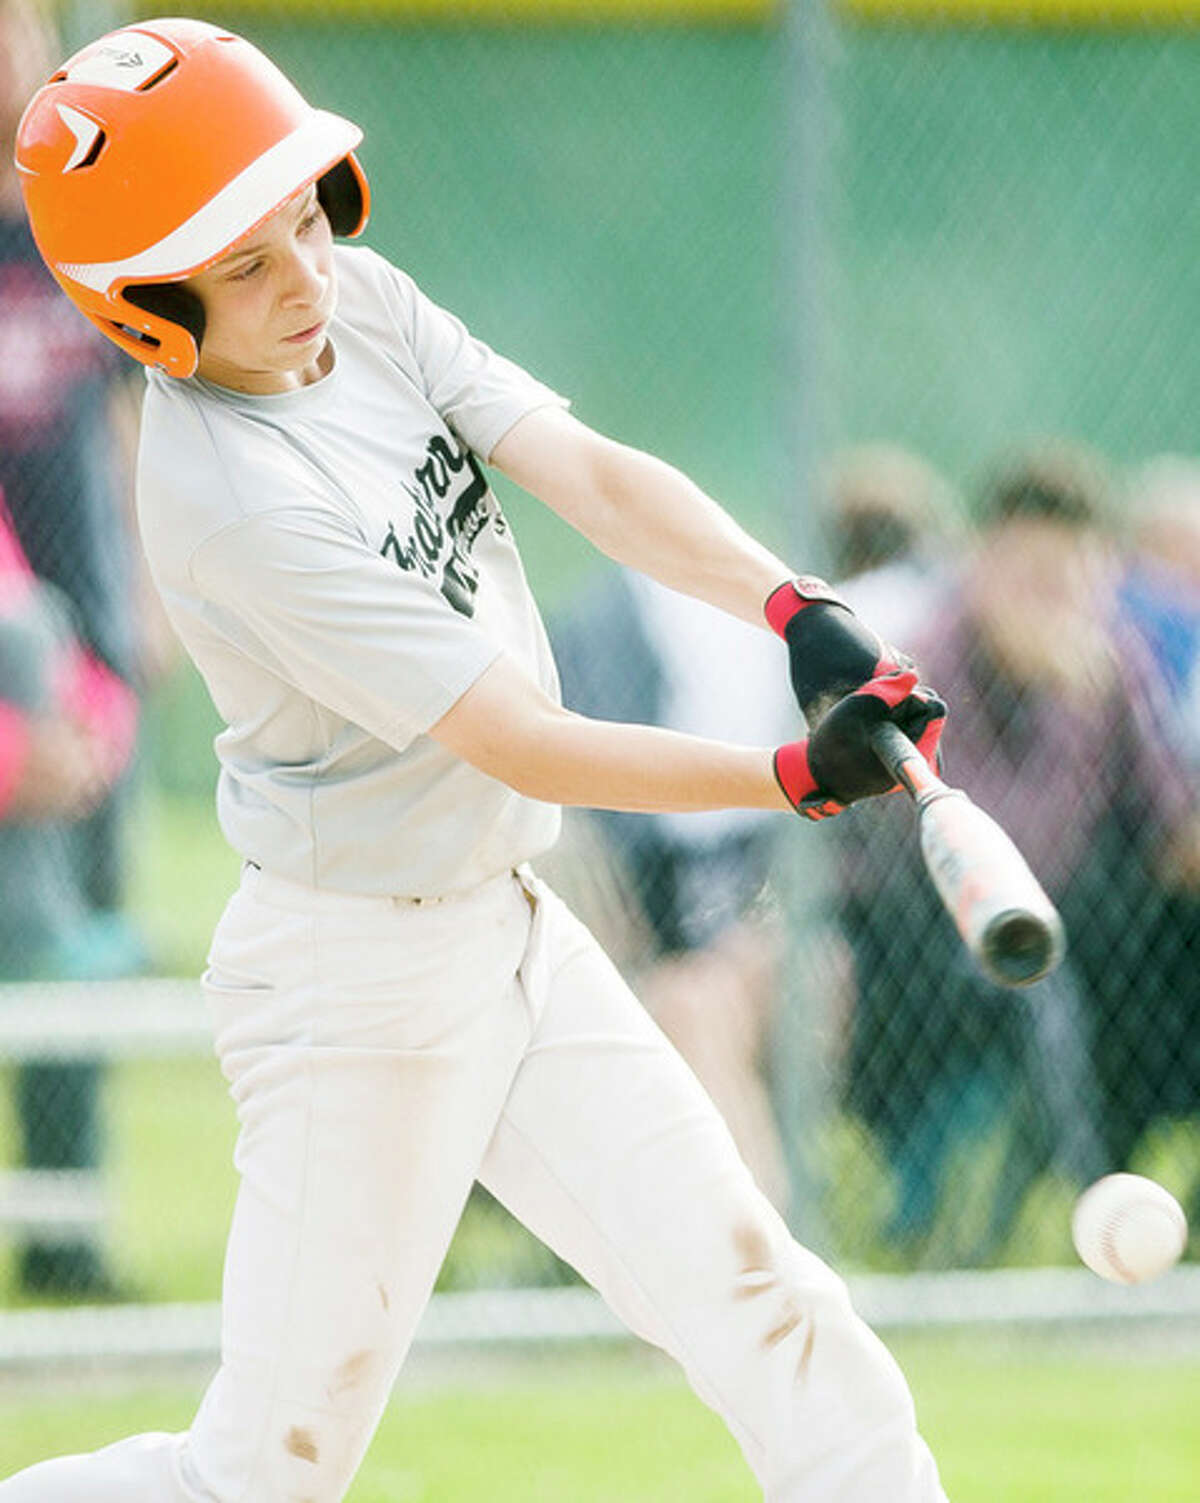 KATY KILDEE | kkildee@mdn.net Anthony Colmus takes a swing during his team's 12-2 victory over Sowle Properties during the major Little League city championship game on Tuesday in Midland.